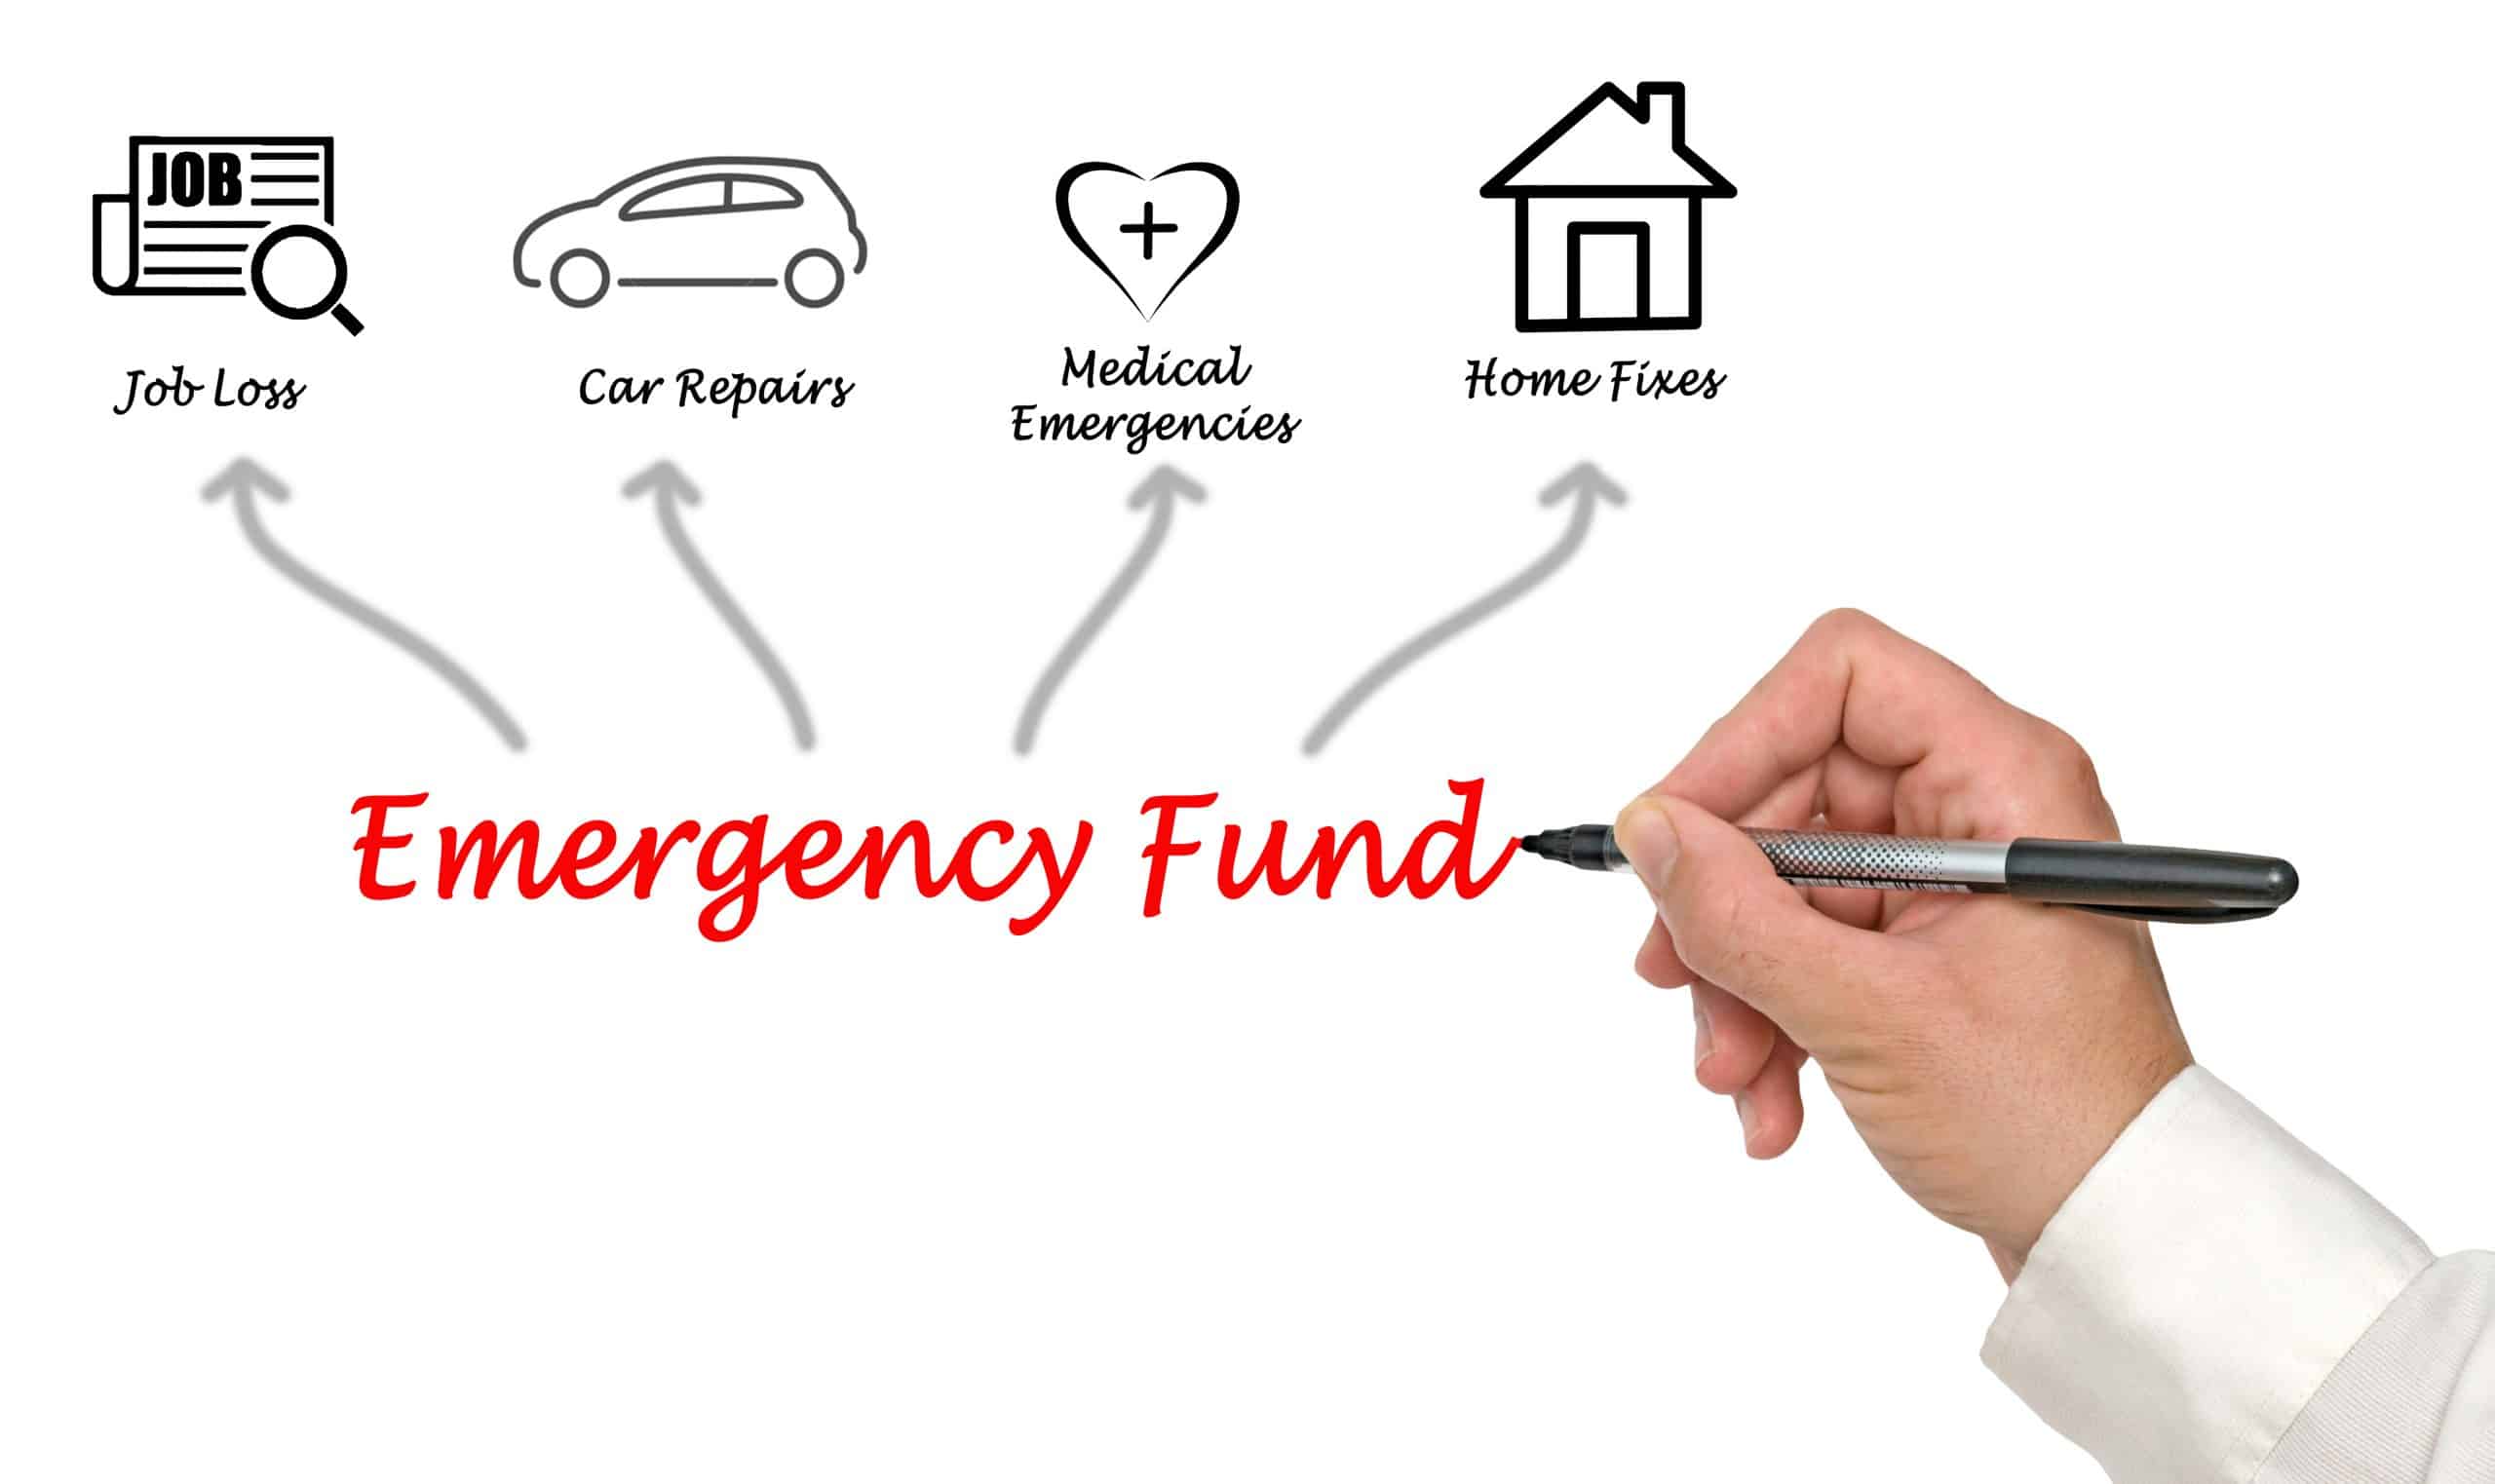 How to build an emergency fund